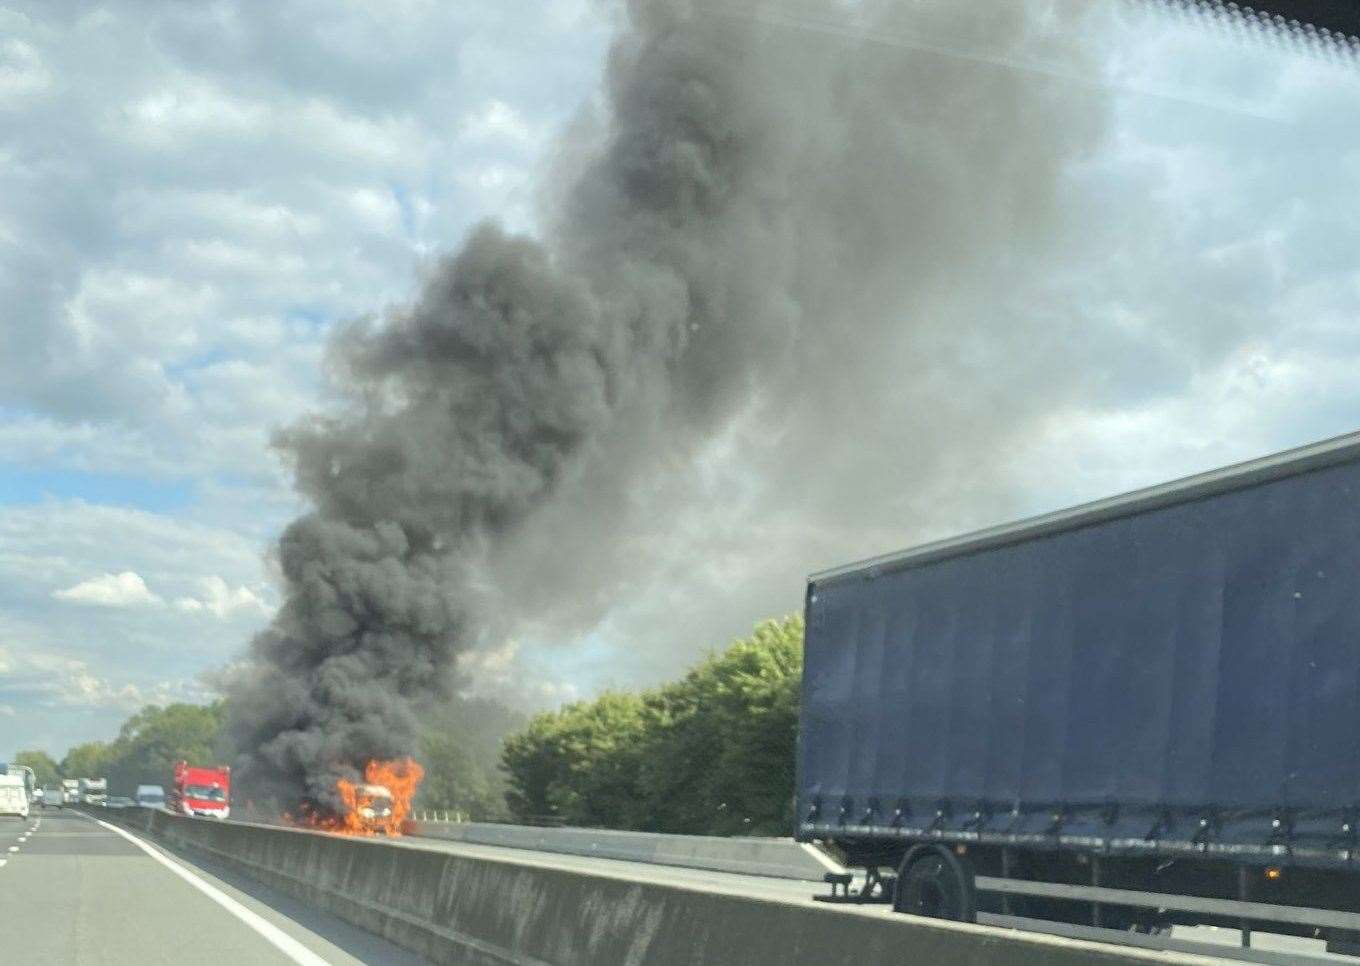 A van fire has caused severe delays on the M25 Picture: @_bontapaige on Twitter